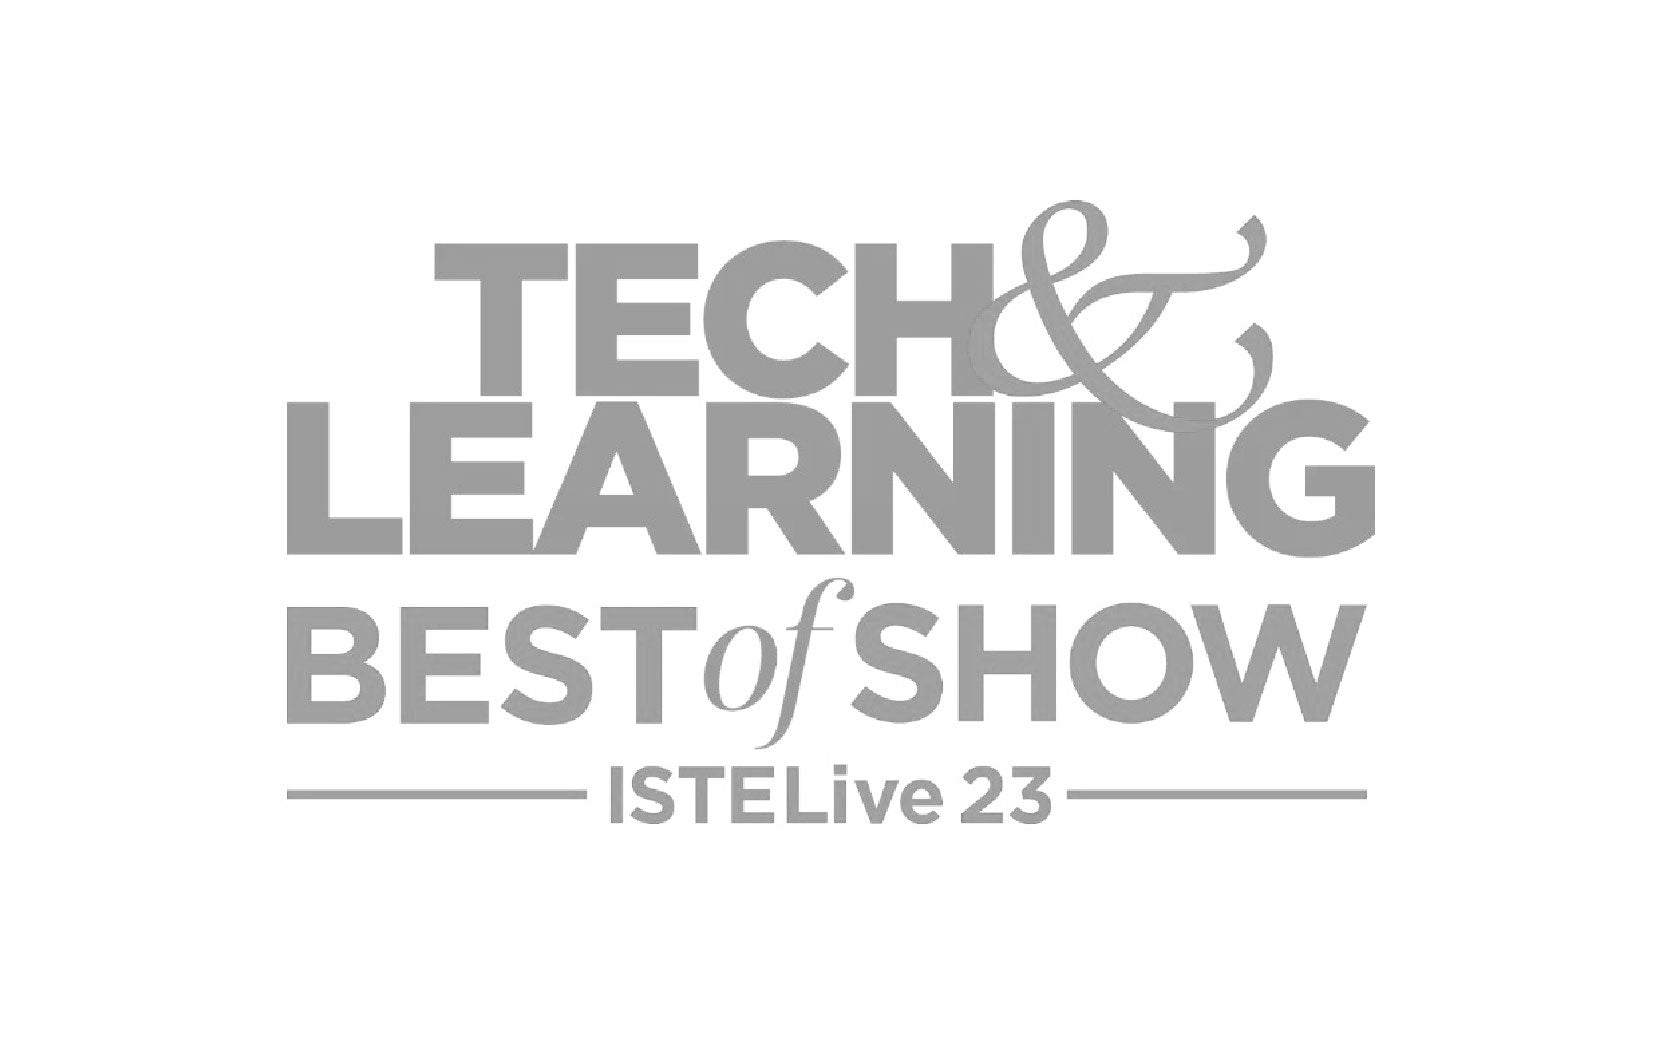 Tech & Learning Best of Show ISTE Live 23